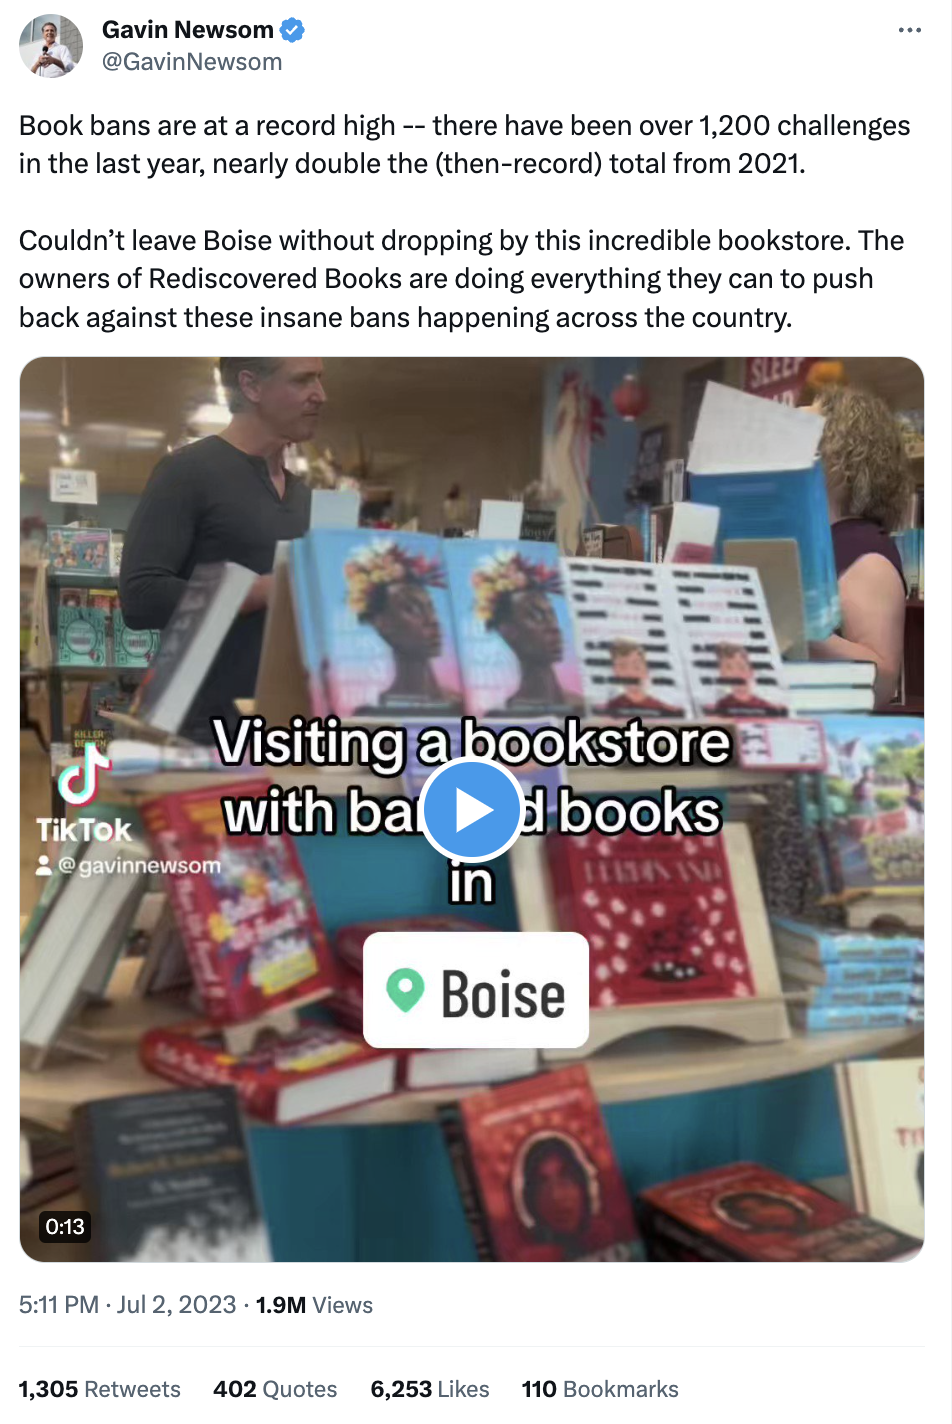 Book bans are at a record high -- there have been over 1,200 challenges in the last year, nearly double the (then-record) total from 2021. Couldn’t leave Boise without dropping by this incredible bookstore. The owners of Rediscovered Books are doing everything they can to push back against these insane bans happening across the country.